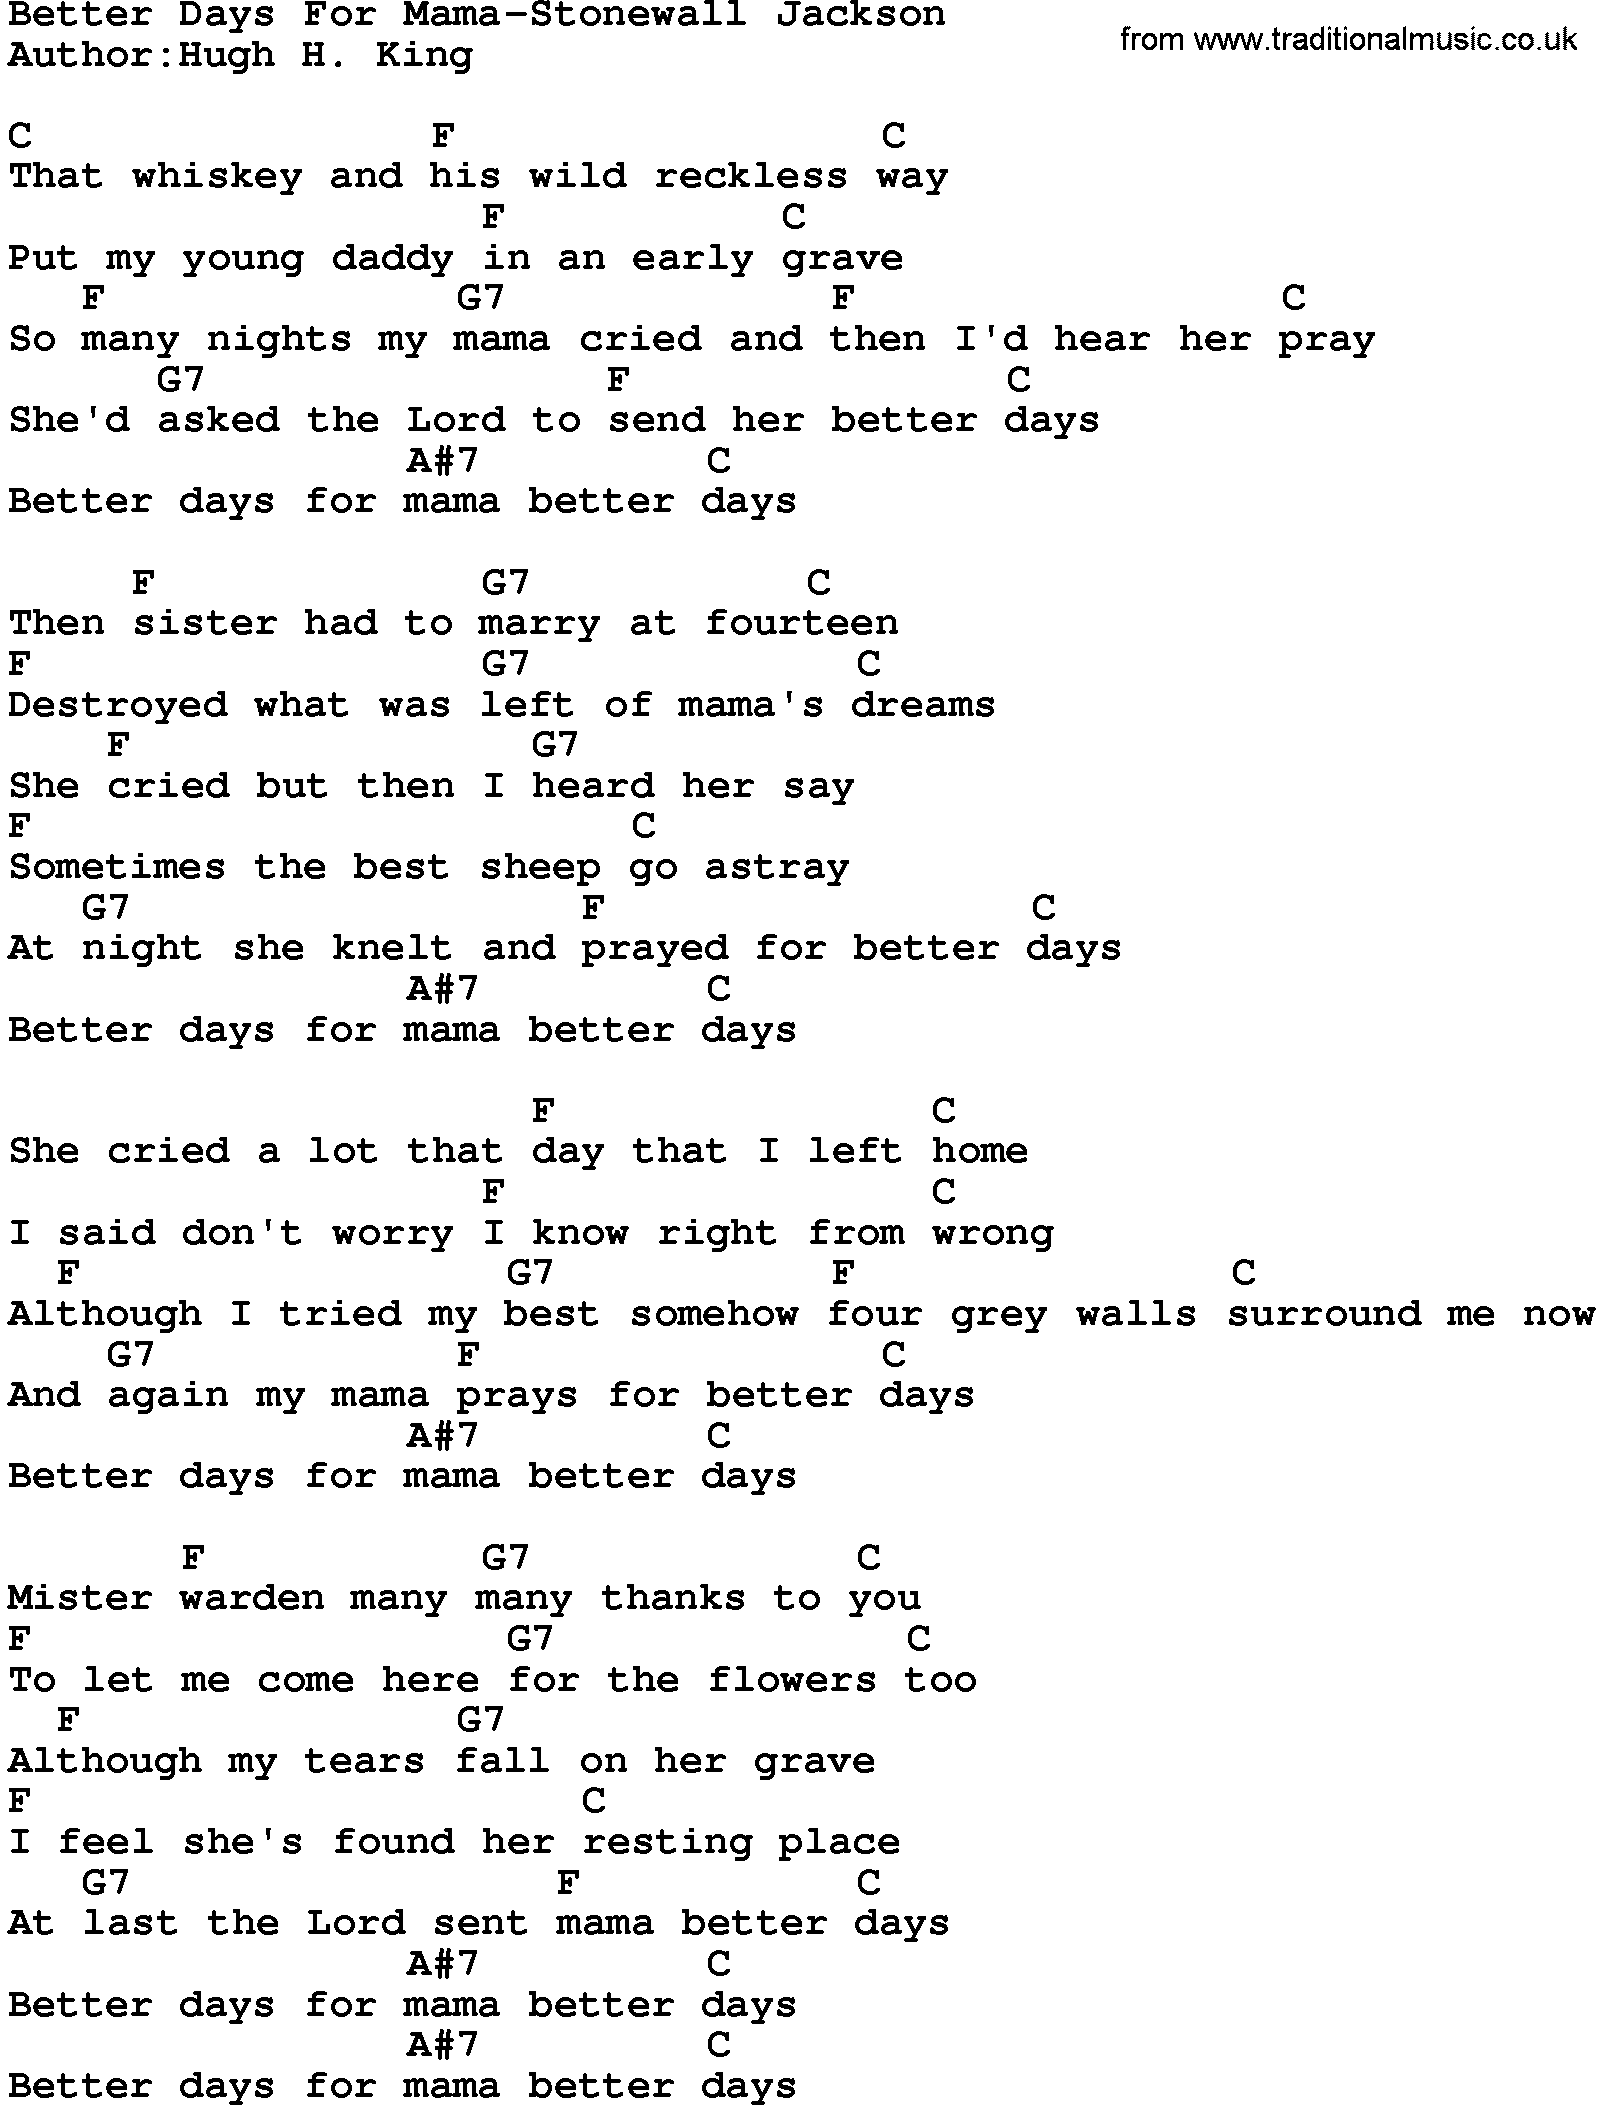 Country music song: Better Days For Mama-Stonewall Jackson lyrics and chords